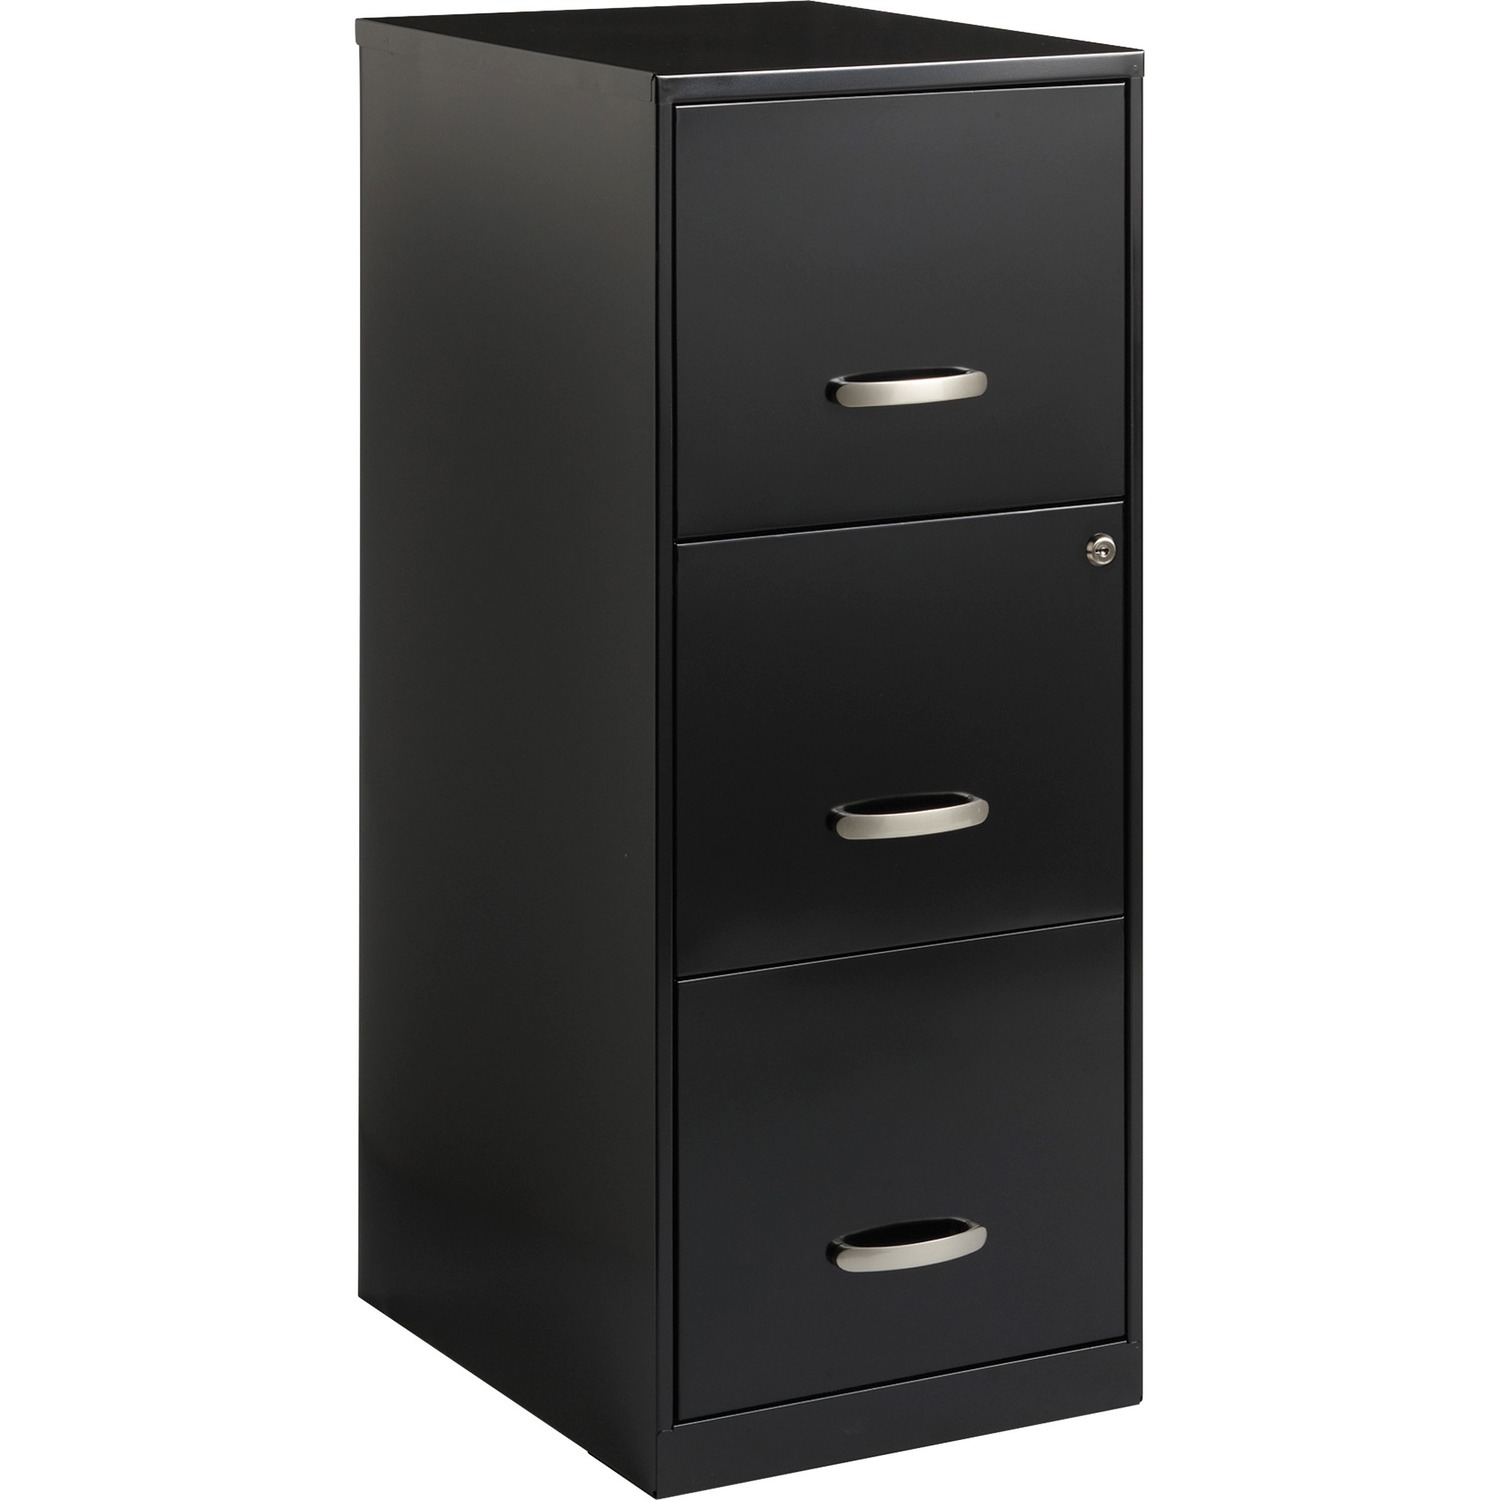 Space Solutions Metal 3 Drawer Vertical File Cabinet with Lock in Black - image 1 of 2